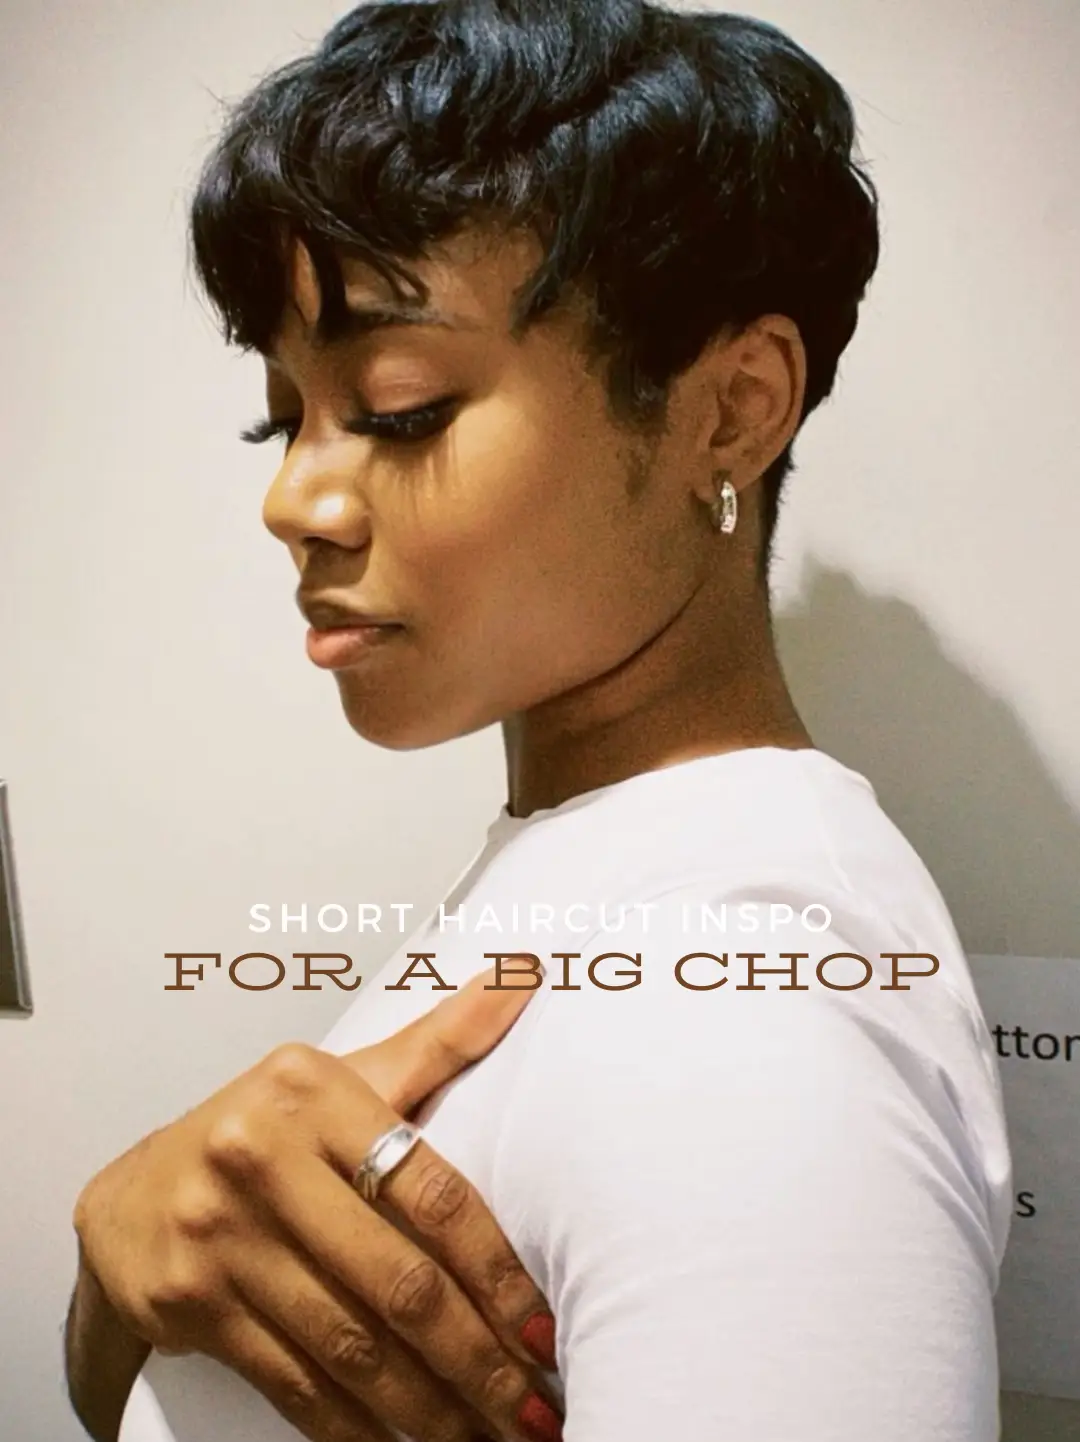 just short haircuts, nothing else. If you're thinking of getting an  undercut, sidecut, pixie…